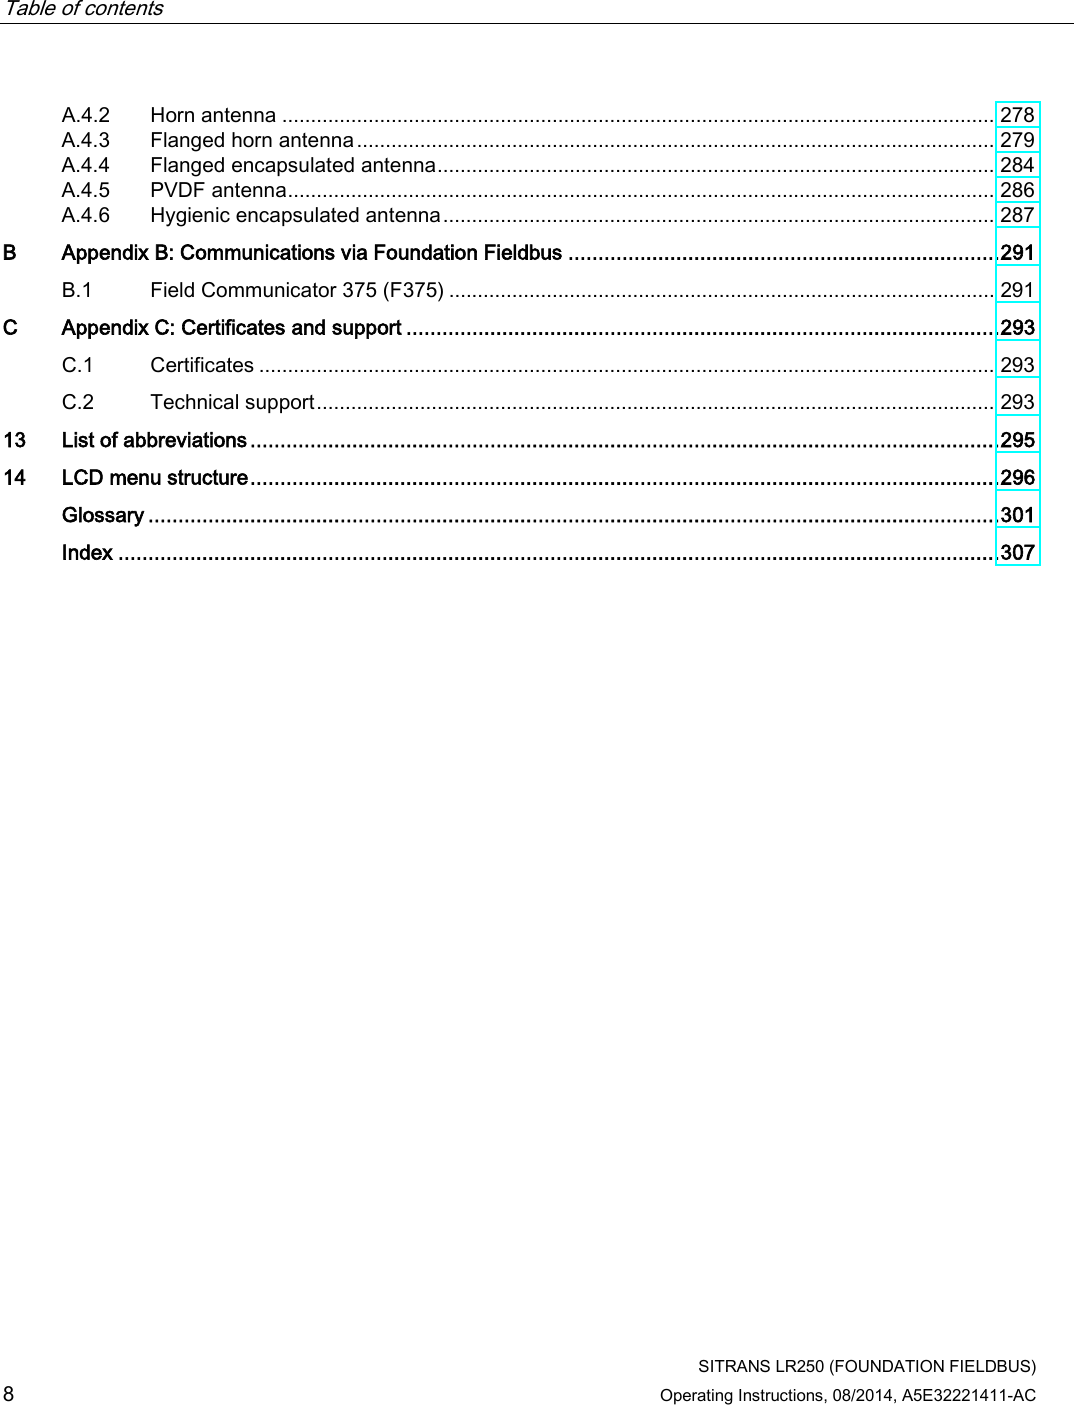 Table of contents      SITRANS LR250 (FOUNDATION FIELDBUS) 8 Operating Instructions, 08/2014, A5E32221411-AC A.4.2 Horn antenna ............................................................................................................................ 278 A.4.3 Flanged horn antenna ............................................................................................................... 279 A.4.4 Flanged encapsulated antenna ................................................................................................. 284 A.4.5 PVDF antenna ........................................................................................................................... 286 A.4.6 Hygienic encapsulated antenna ................................................................................................ 287 B  Appendix B: Communications via Foundation Fieldbus ........................................................................ 291 B.1 Field Communicator 375 (F375) ............................................................................................... 291 C  Appendix C: Certificates and support ................................................................................................... 293 C.1 Certificates ................................................................................................................................ 293 C.2 Technical support ...................................................................................................................... 293 13 List of abbreviations ............................................................................................................................. 295 14 LCD menu structure ............................................................................................................................. 296  Glossary .............................................................................................................................................. 301  Index ................................................................................................................................................... 307 